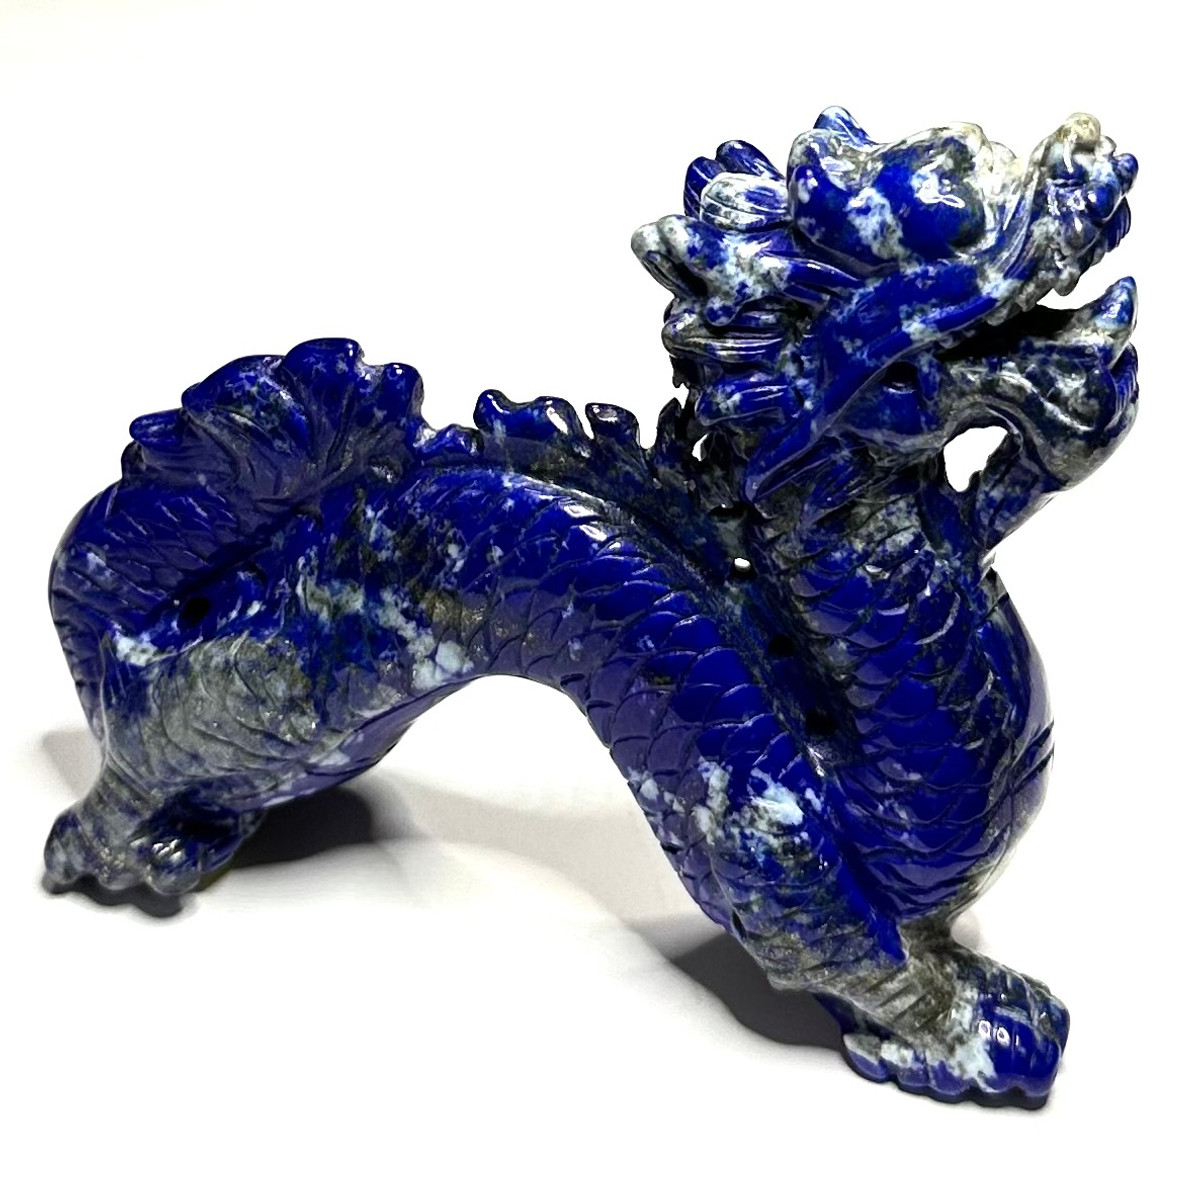 One of a Kind Carved Lapis Dragon-4 1/2 x 3 1/2"